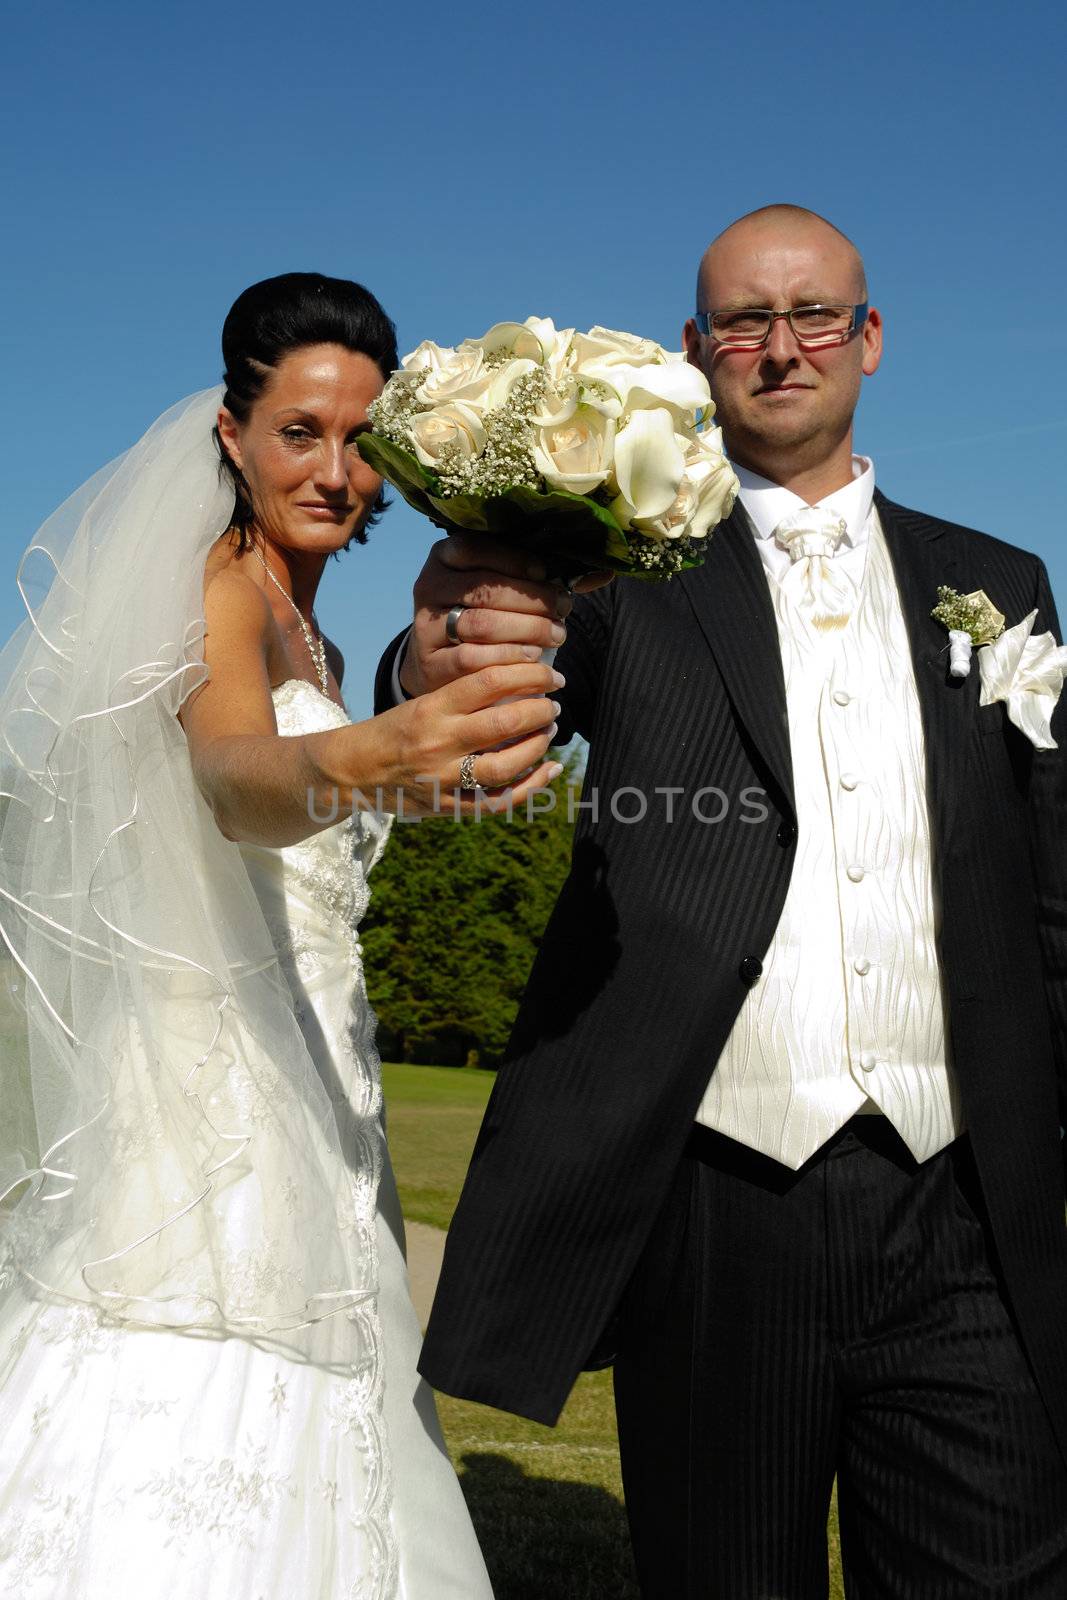 Bride and groom is holding the wedding bouquet together. Focus on the bouquet.